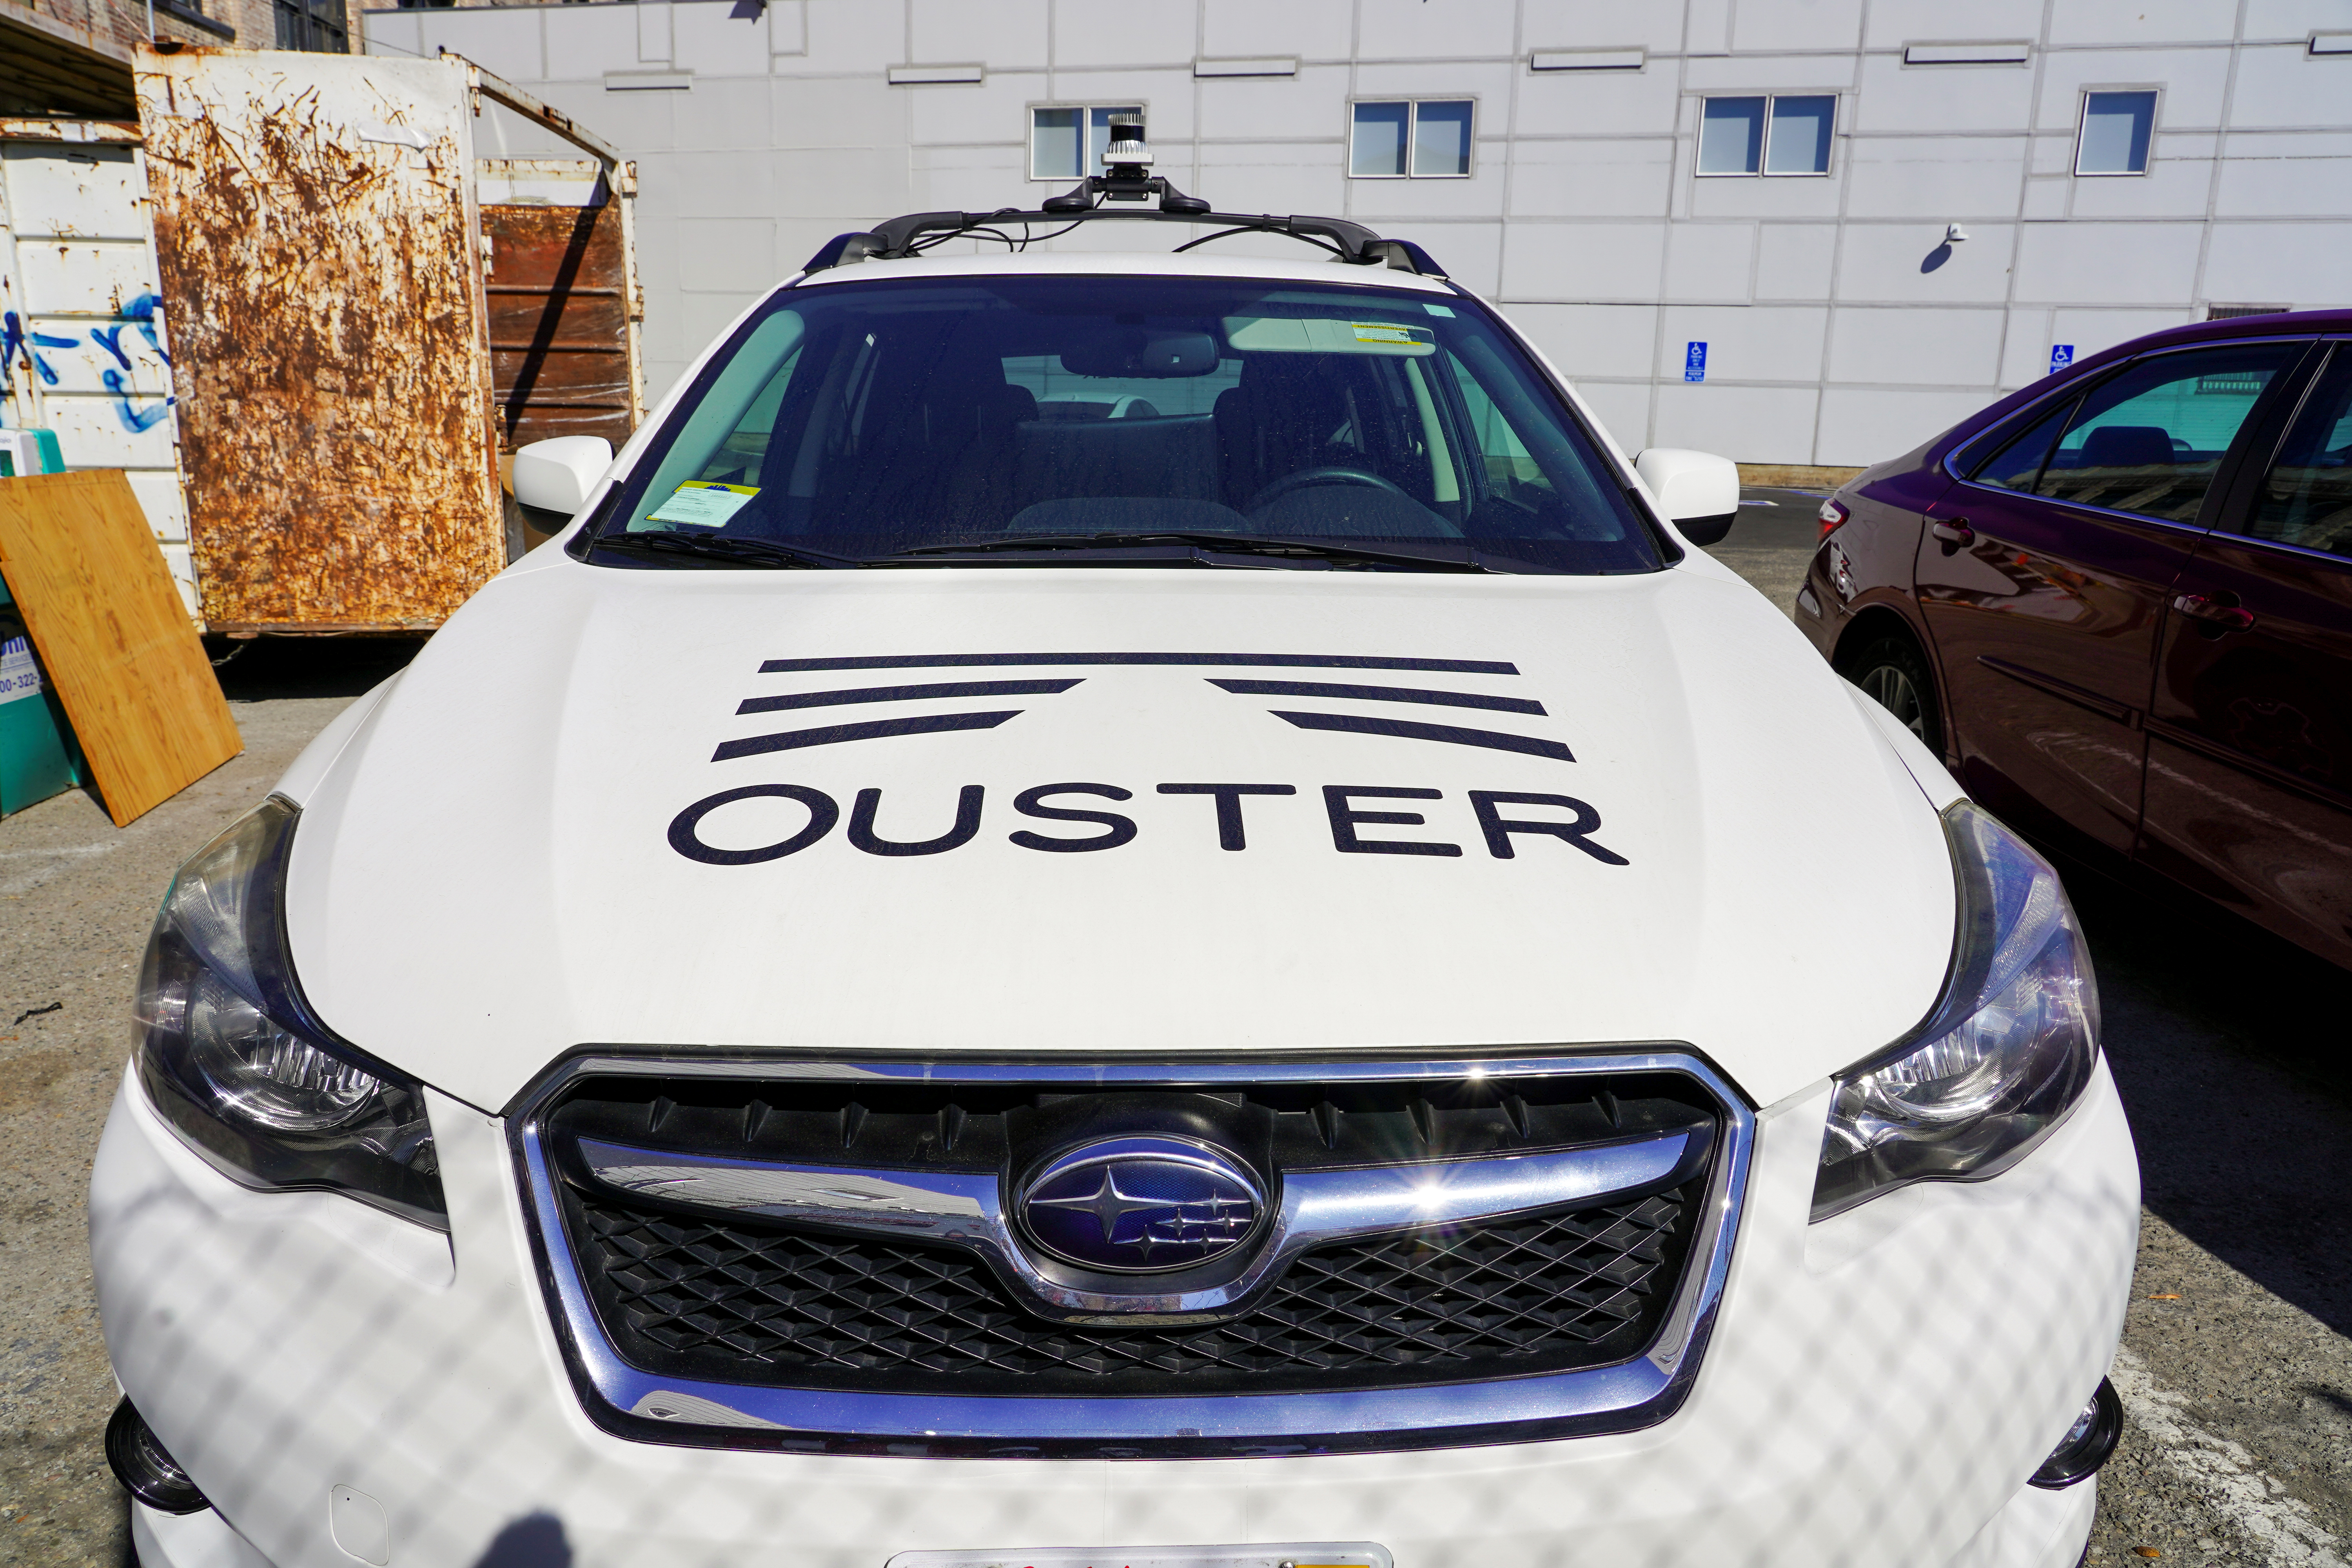 A car outfitted with Ouster's lidar, used in scanning the area on a self-driving vehicle, is parked at the technology company's office in San Francisco